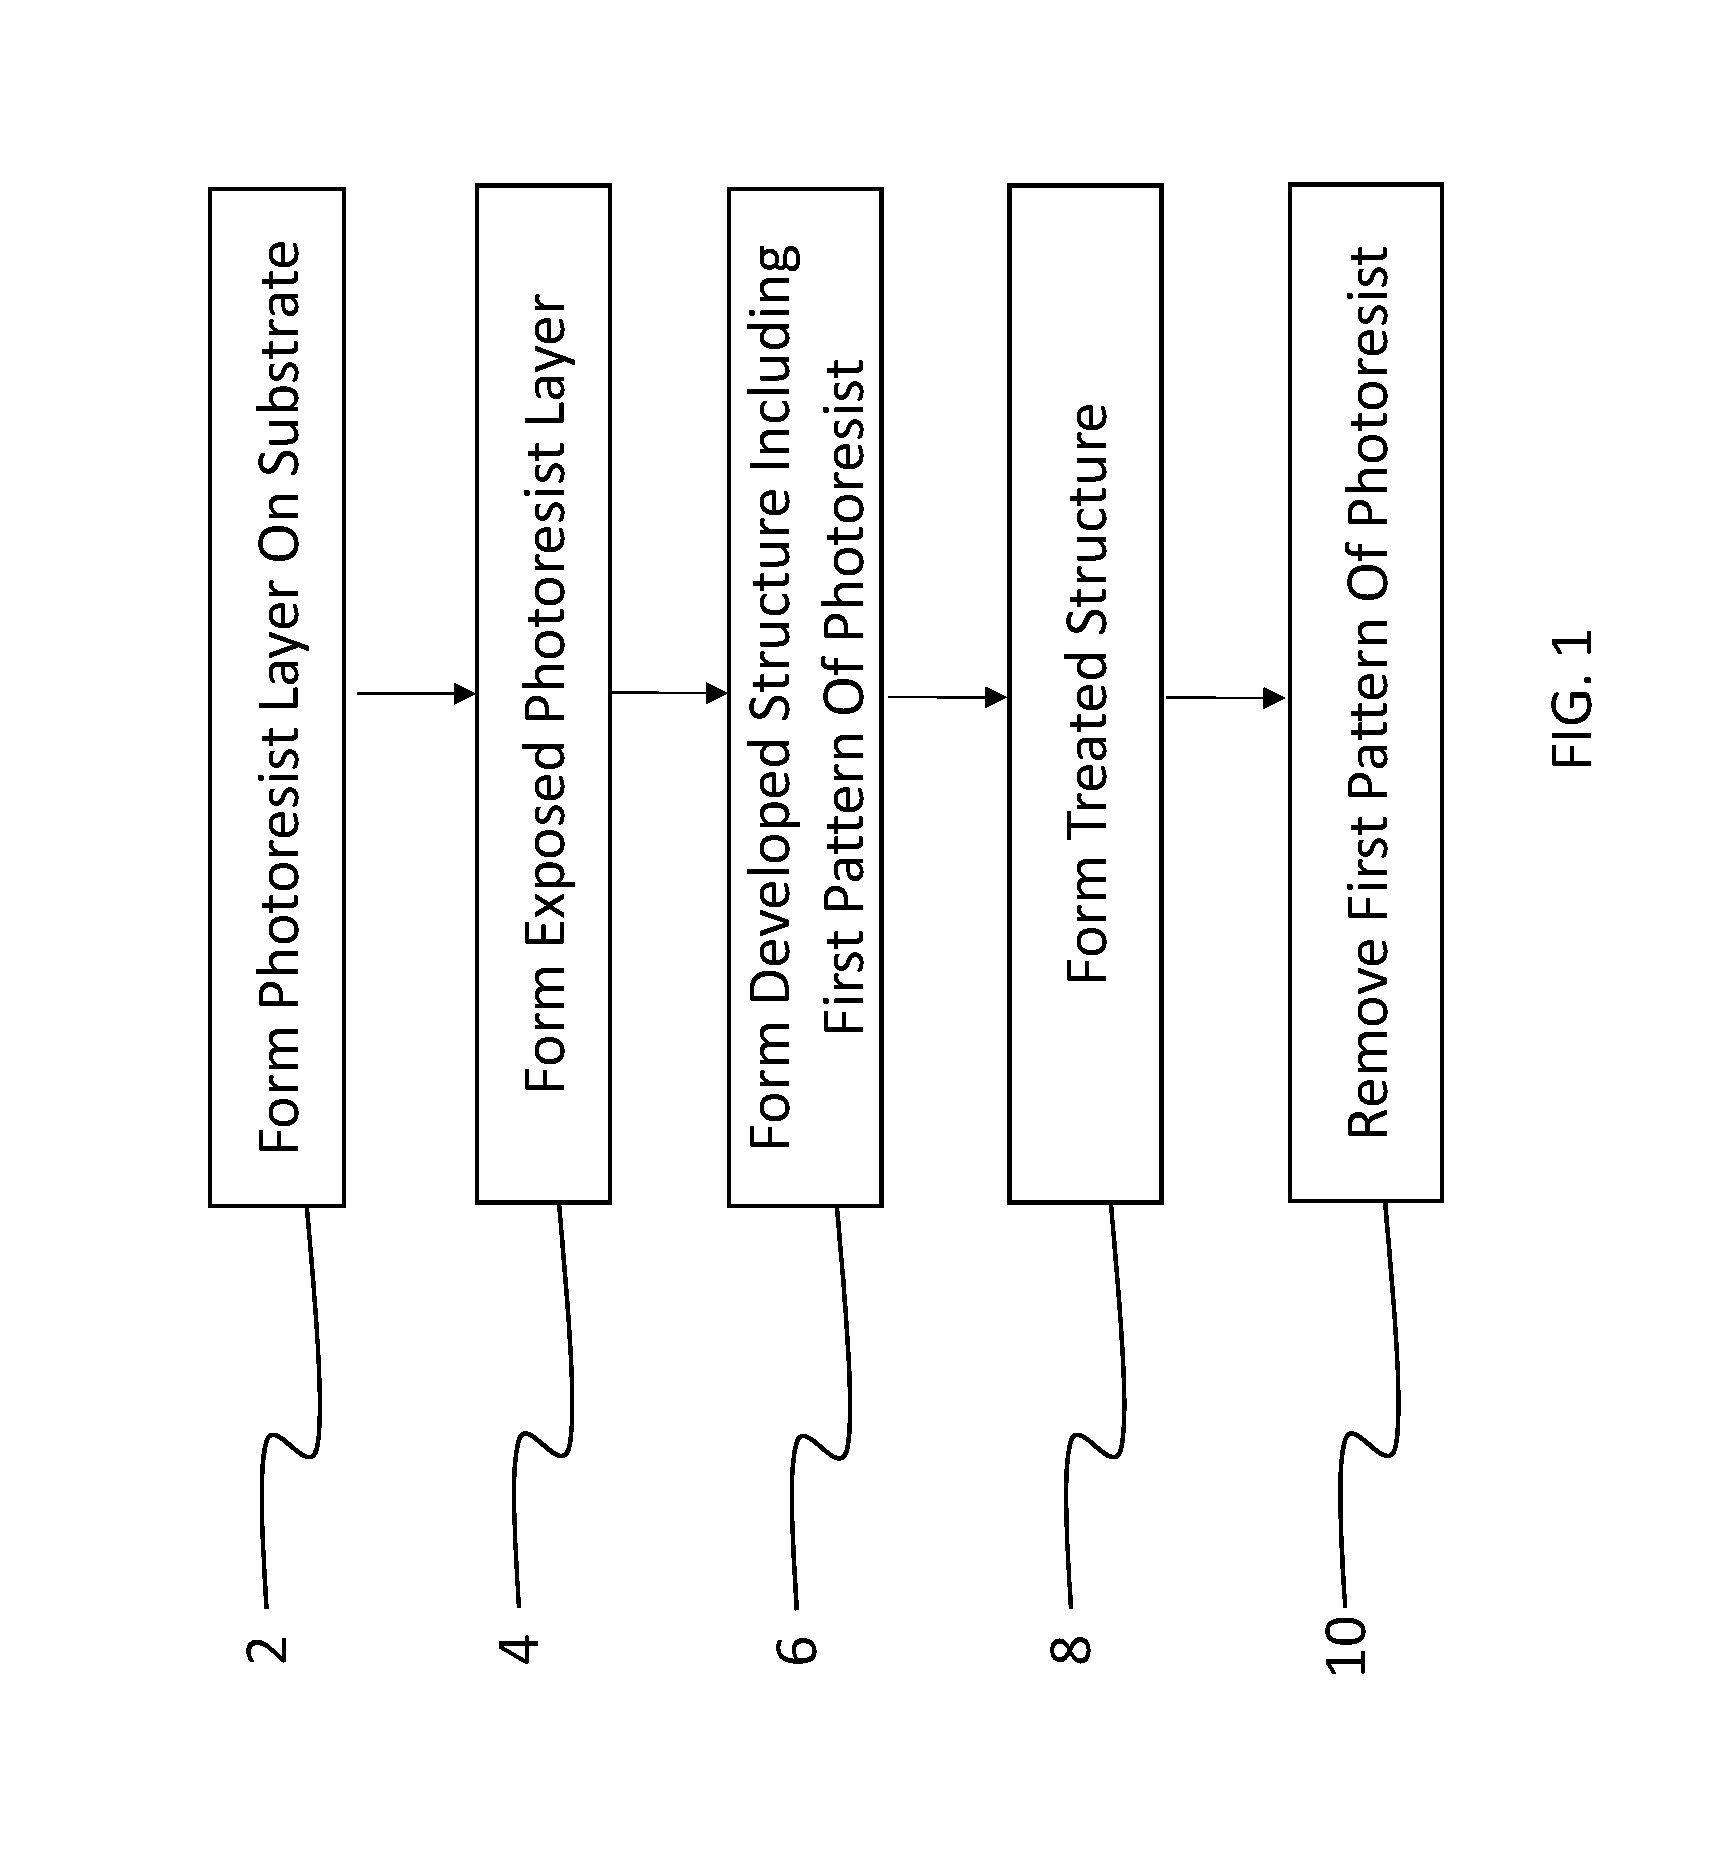 Fluorinated photoresist with integrated sensitizer